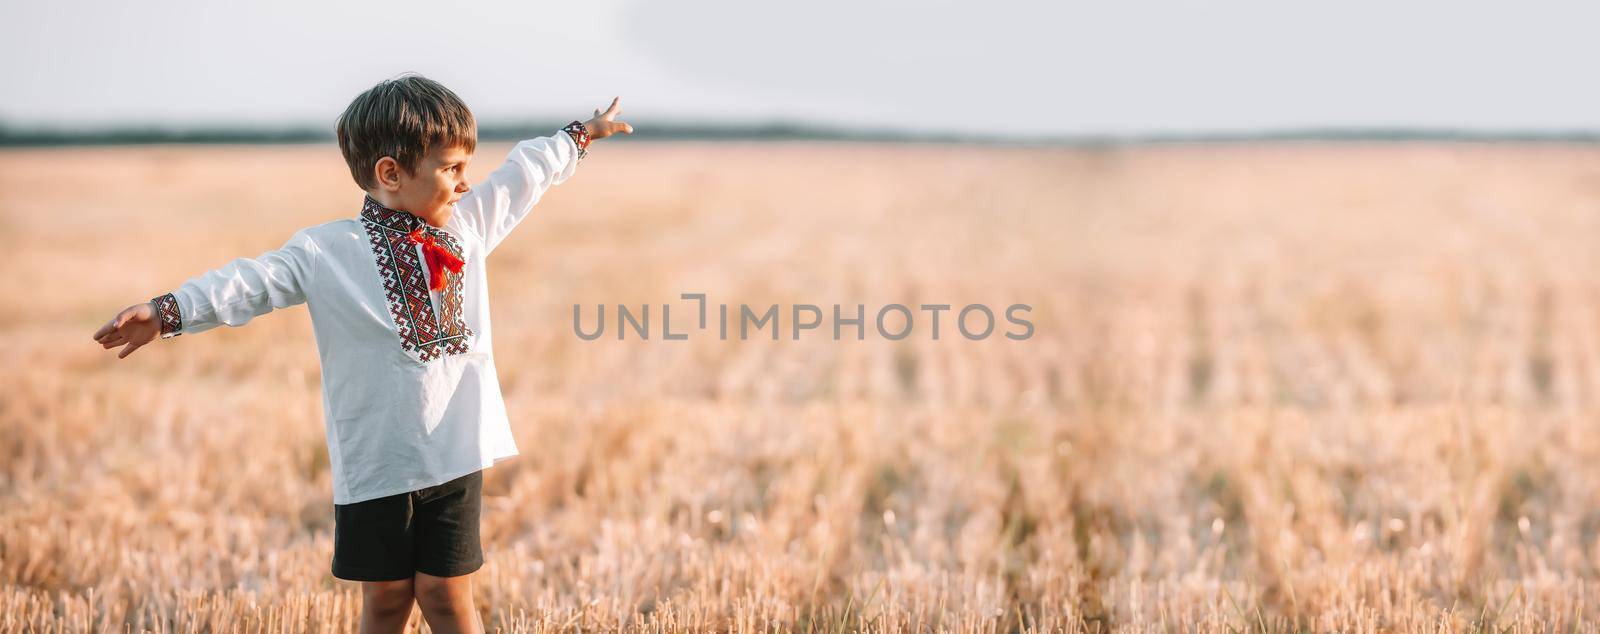 Banner, copy space, happy boy - Ukrainian patriot child with open arms as airplane in field after collection wheat, open area. Ukraine, peace, independence, freedom, win in war. High quality photo